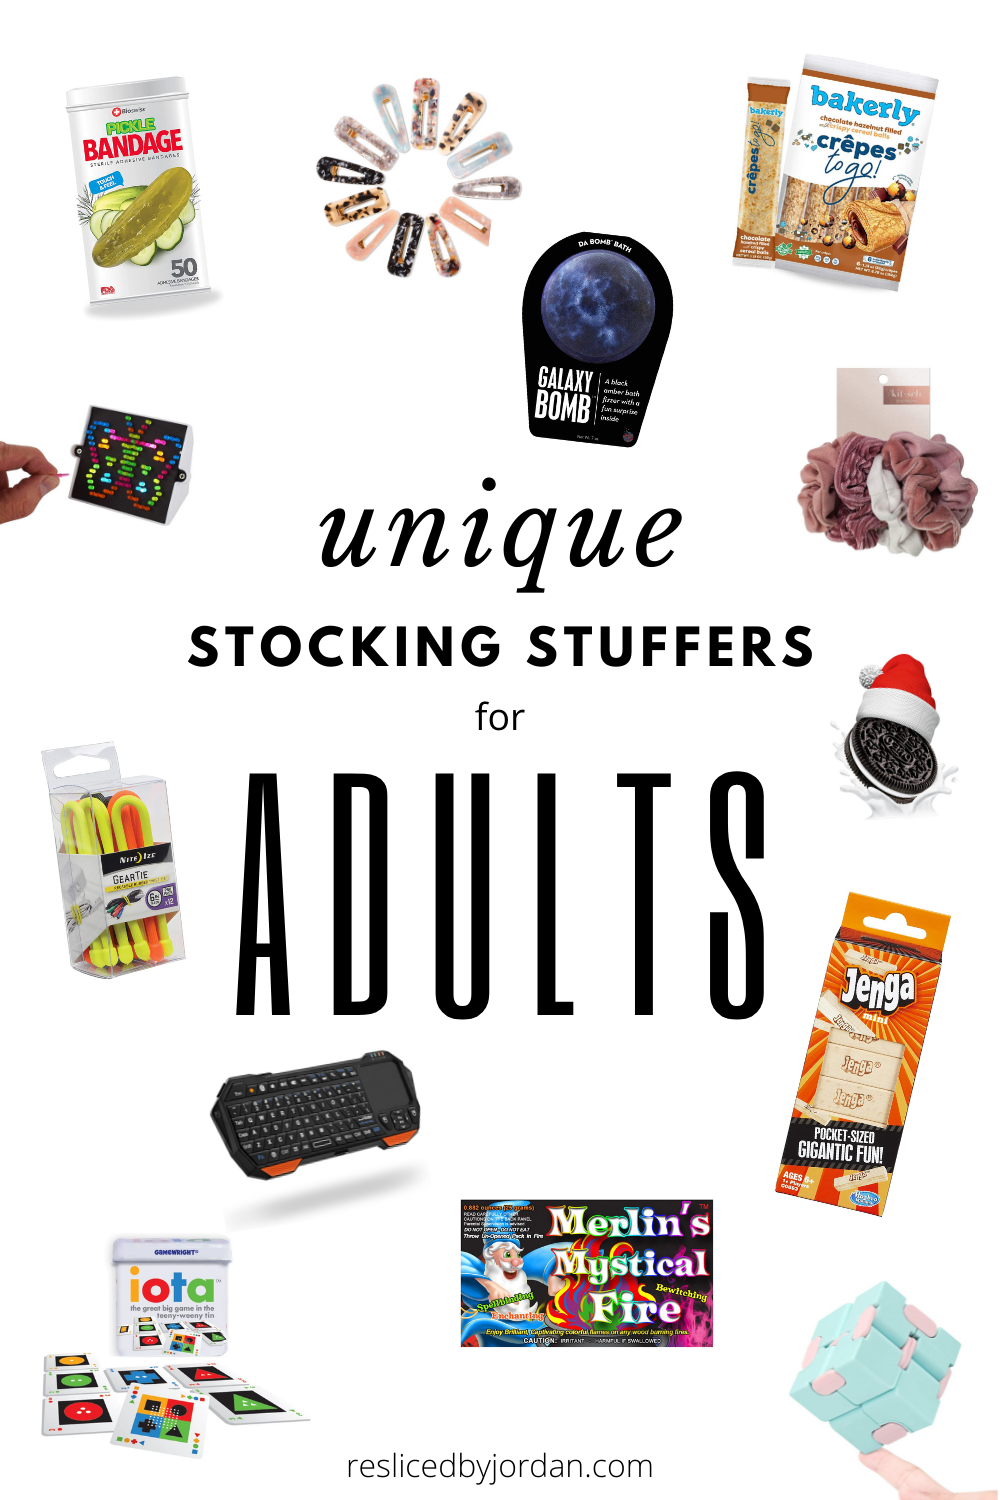 The Best Stocking Stuffers For Women - The Mom Edit